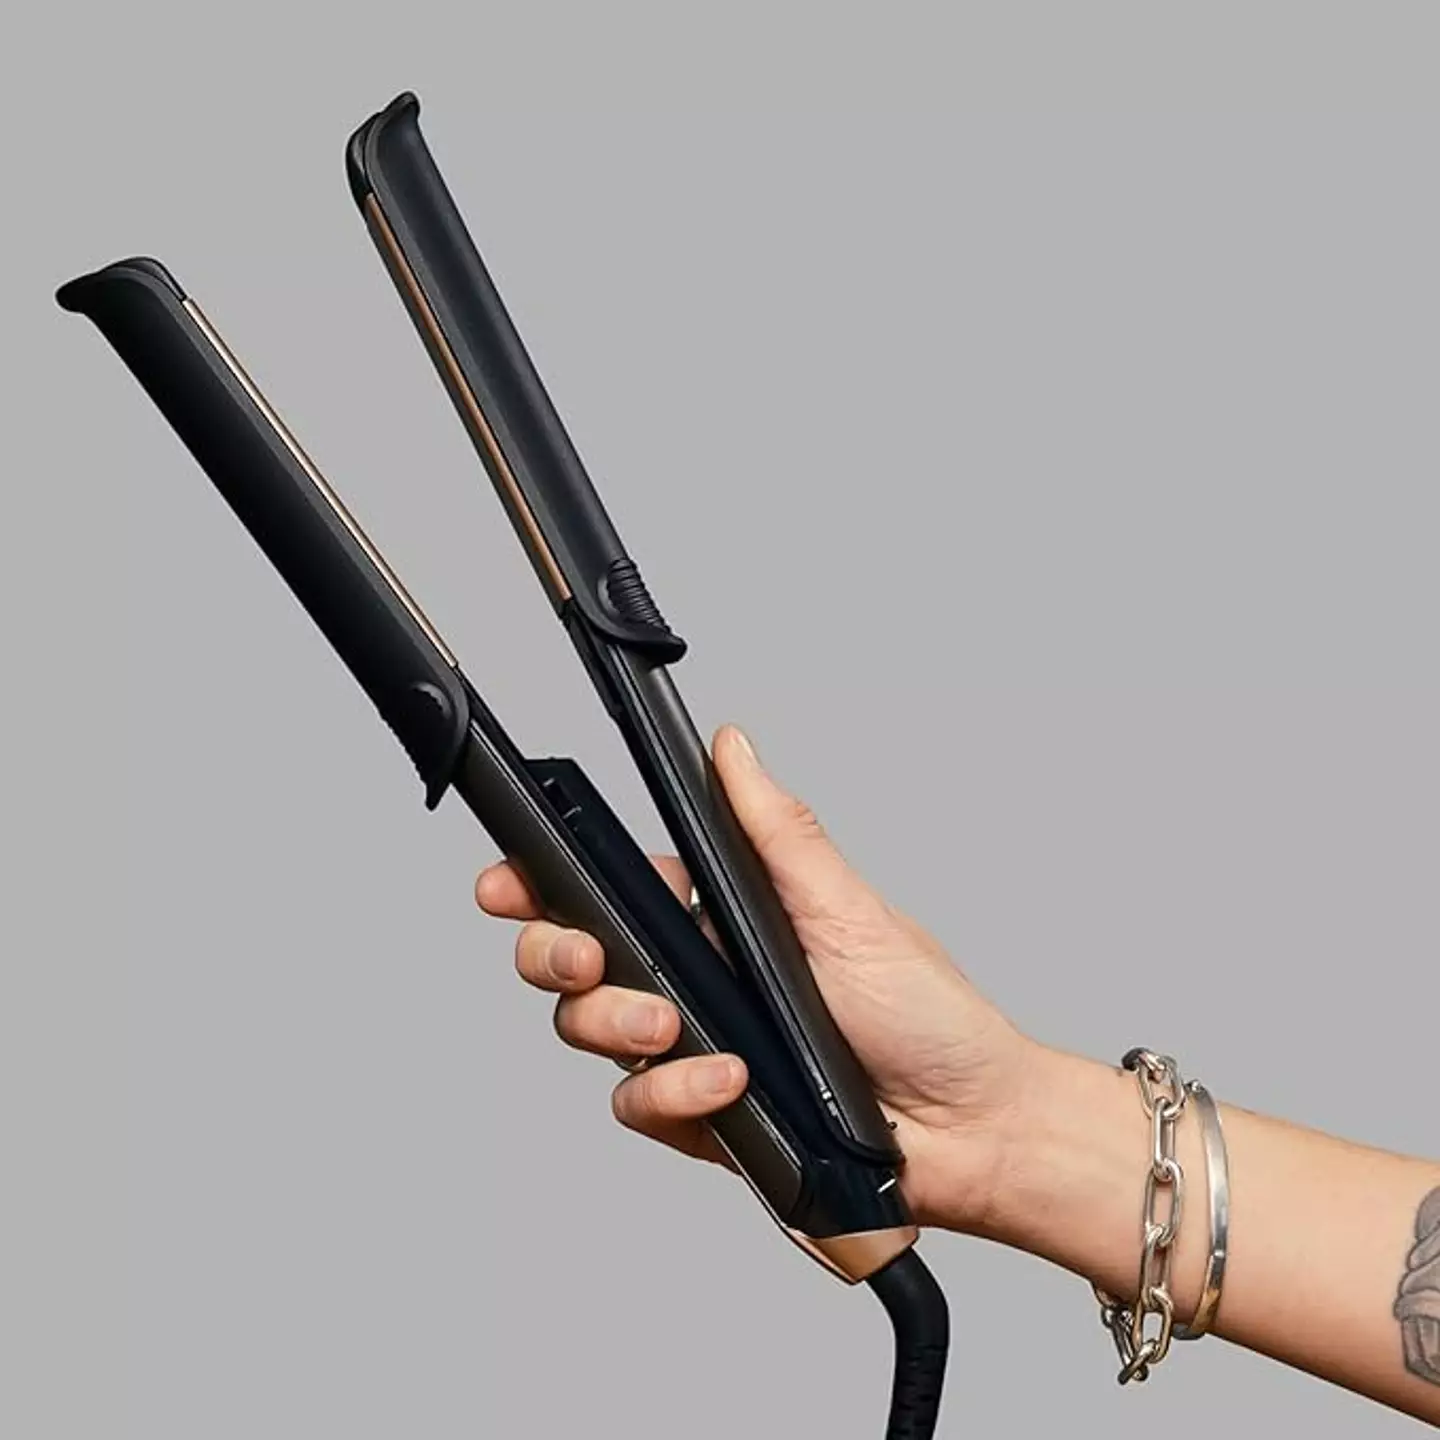 There's £65 off this Remington styler.